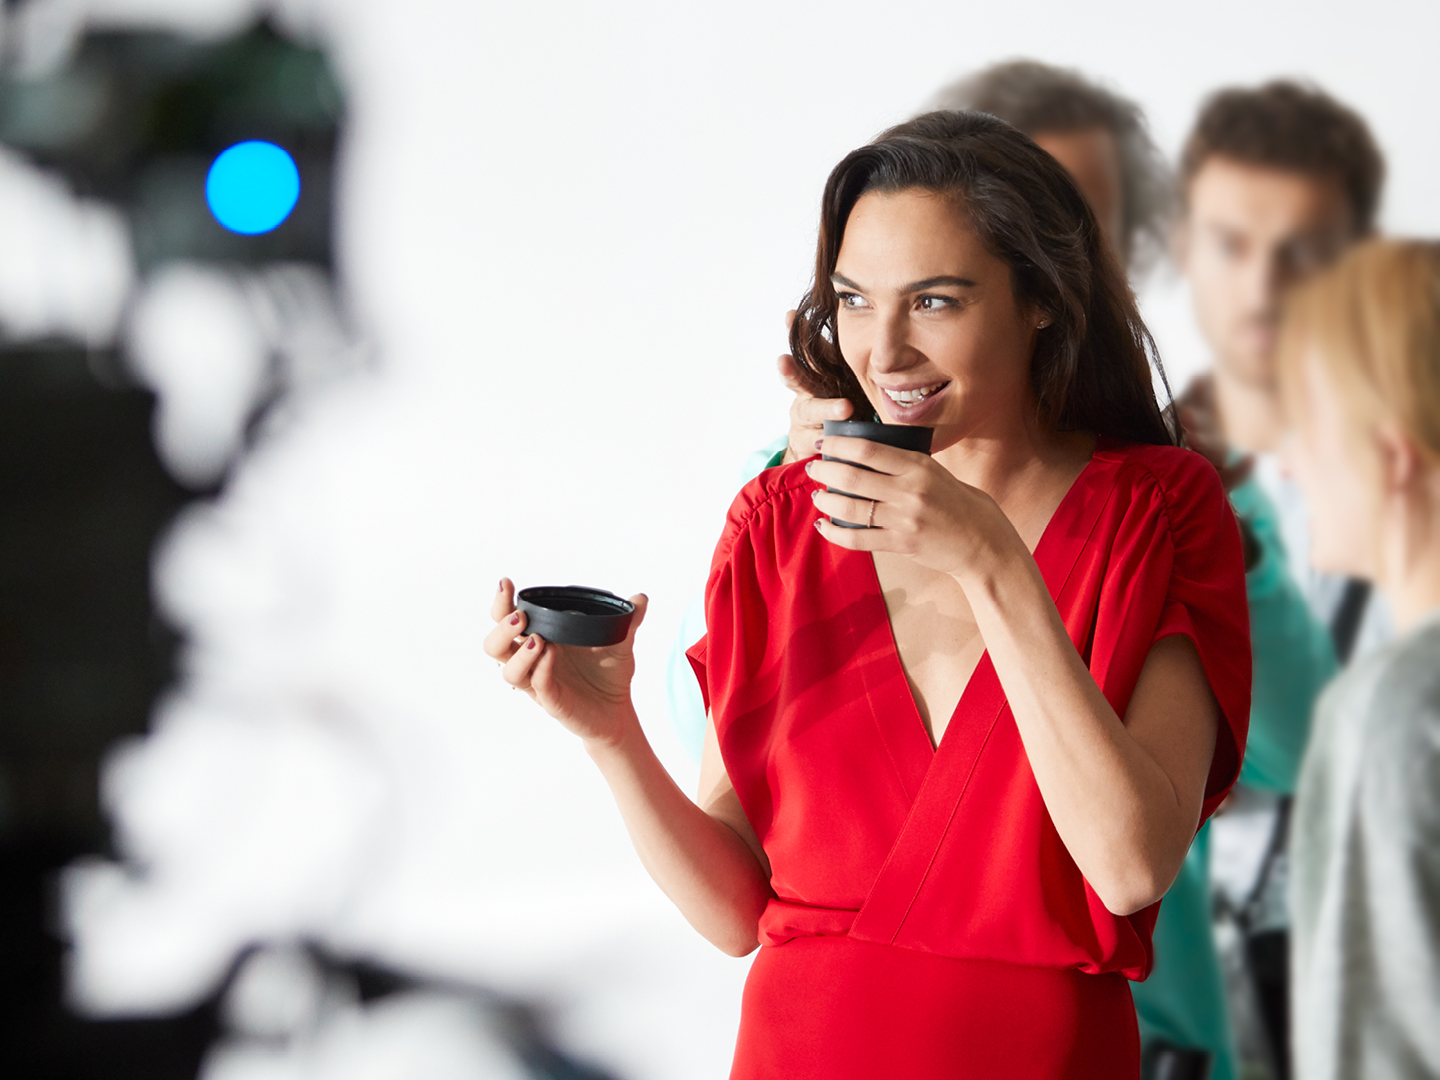 Gal Gador for Revlon  - Behind the scene shot, sipping Coffee